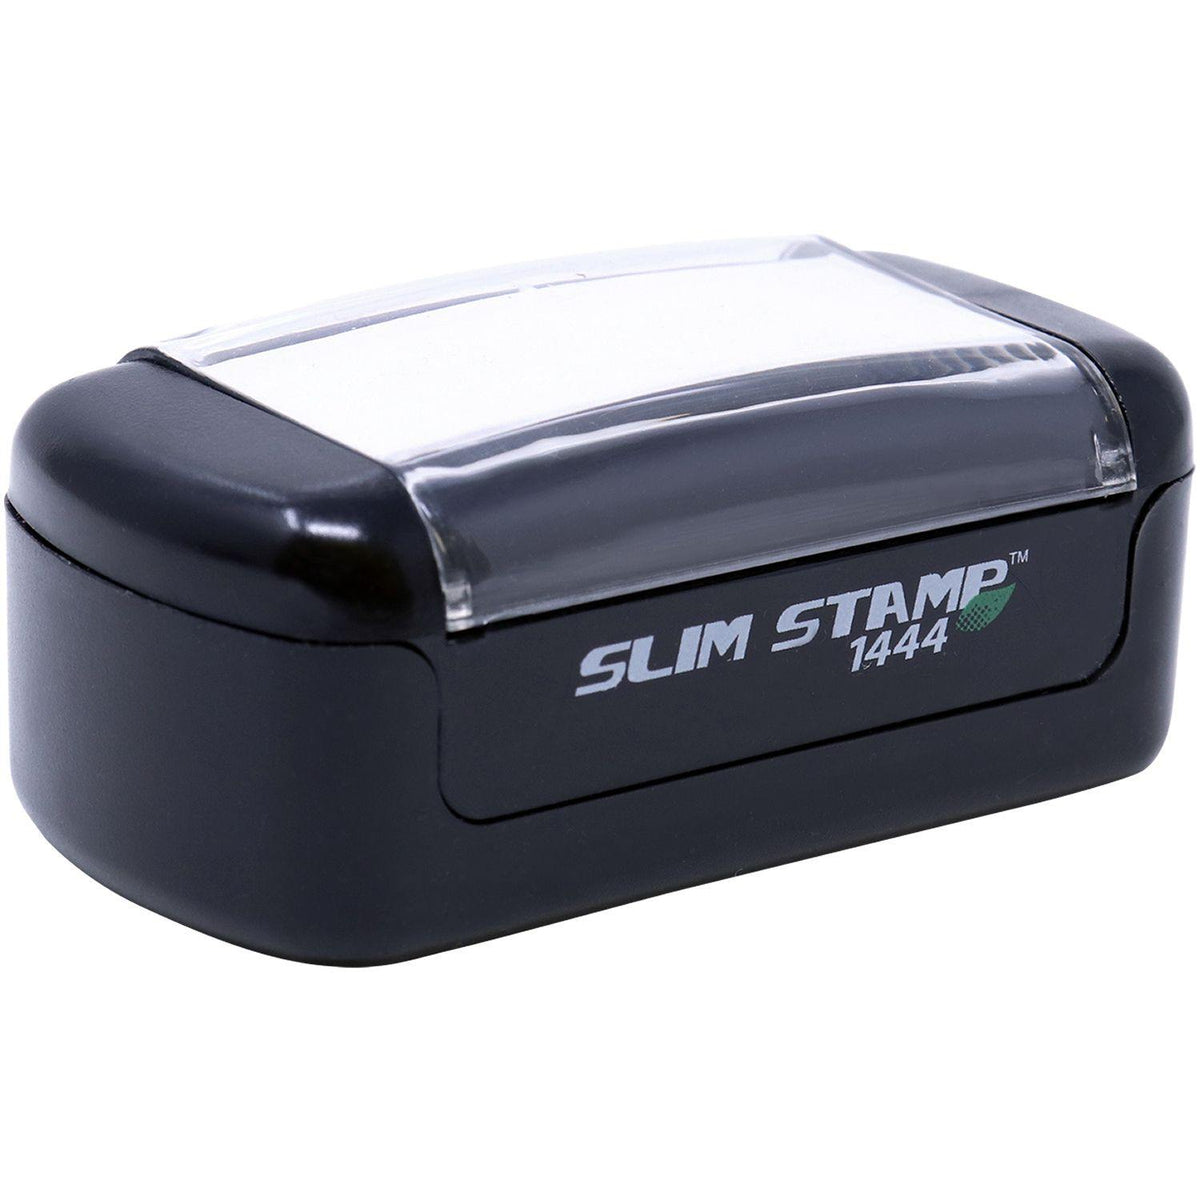 Alt View of Slim Pre-Inked Check Your Work Stamp Mount Angle